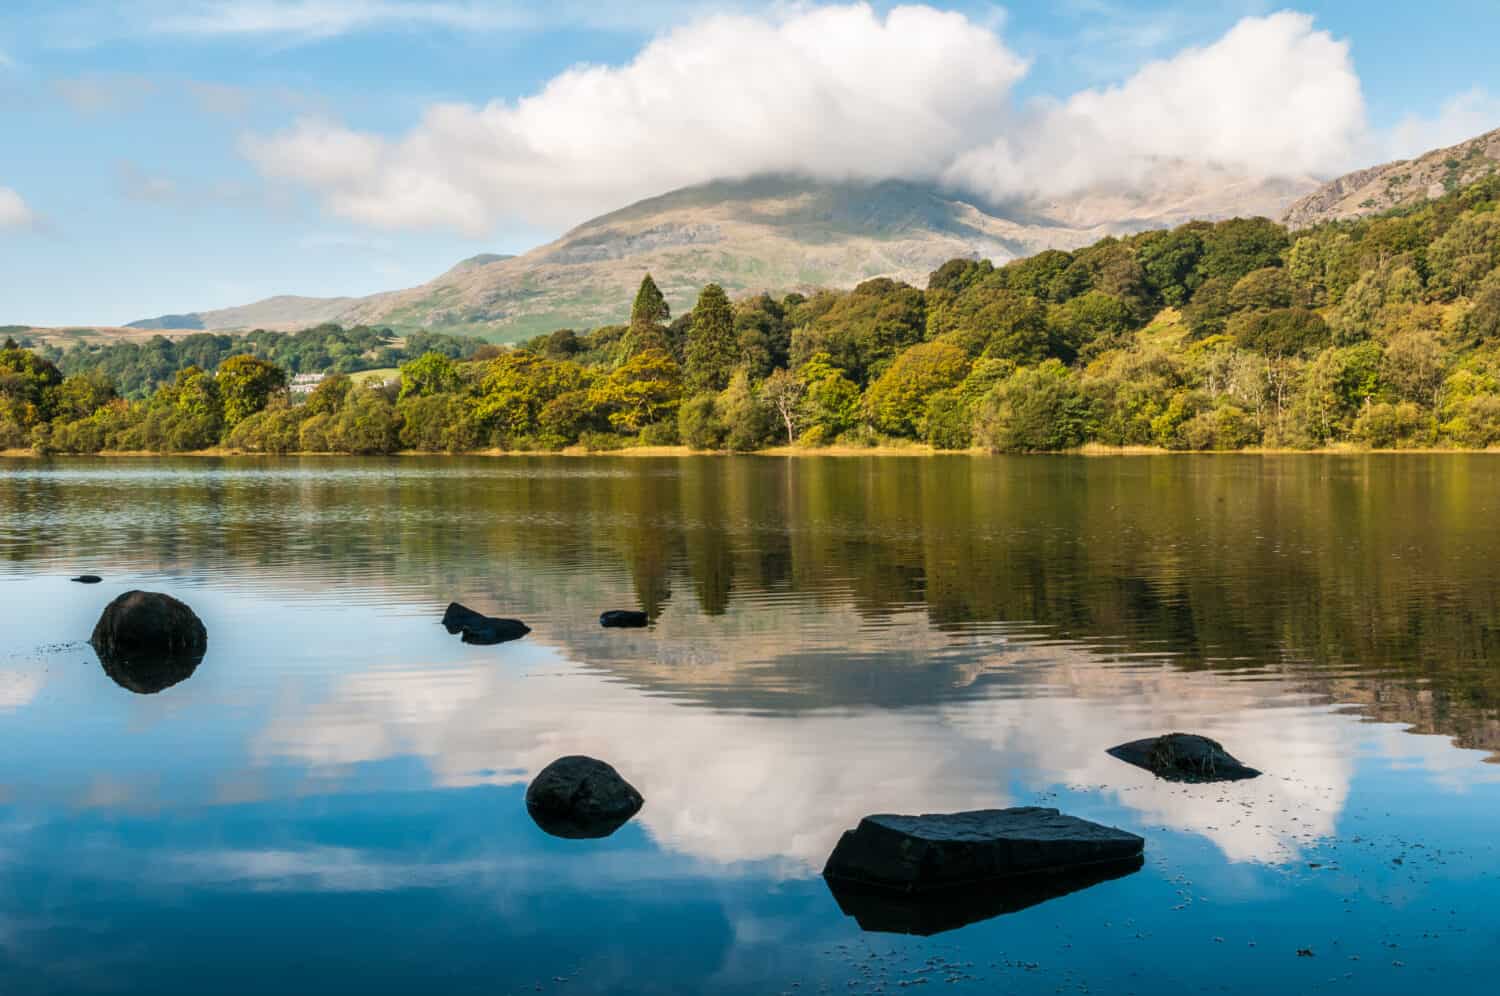 An early morning view of Coniston Water in the English Lake District. The summit of Coniston Old Man in the background is hiding in the clouds.